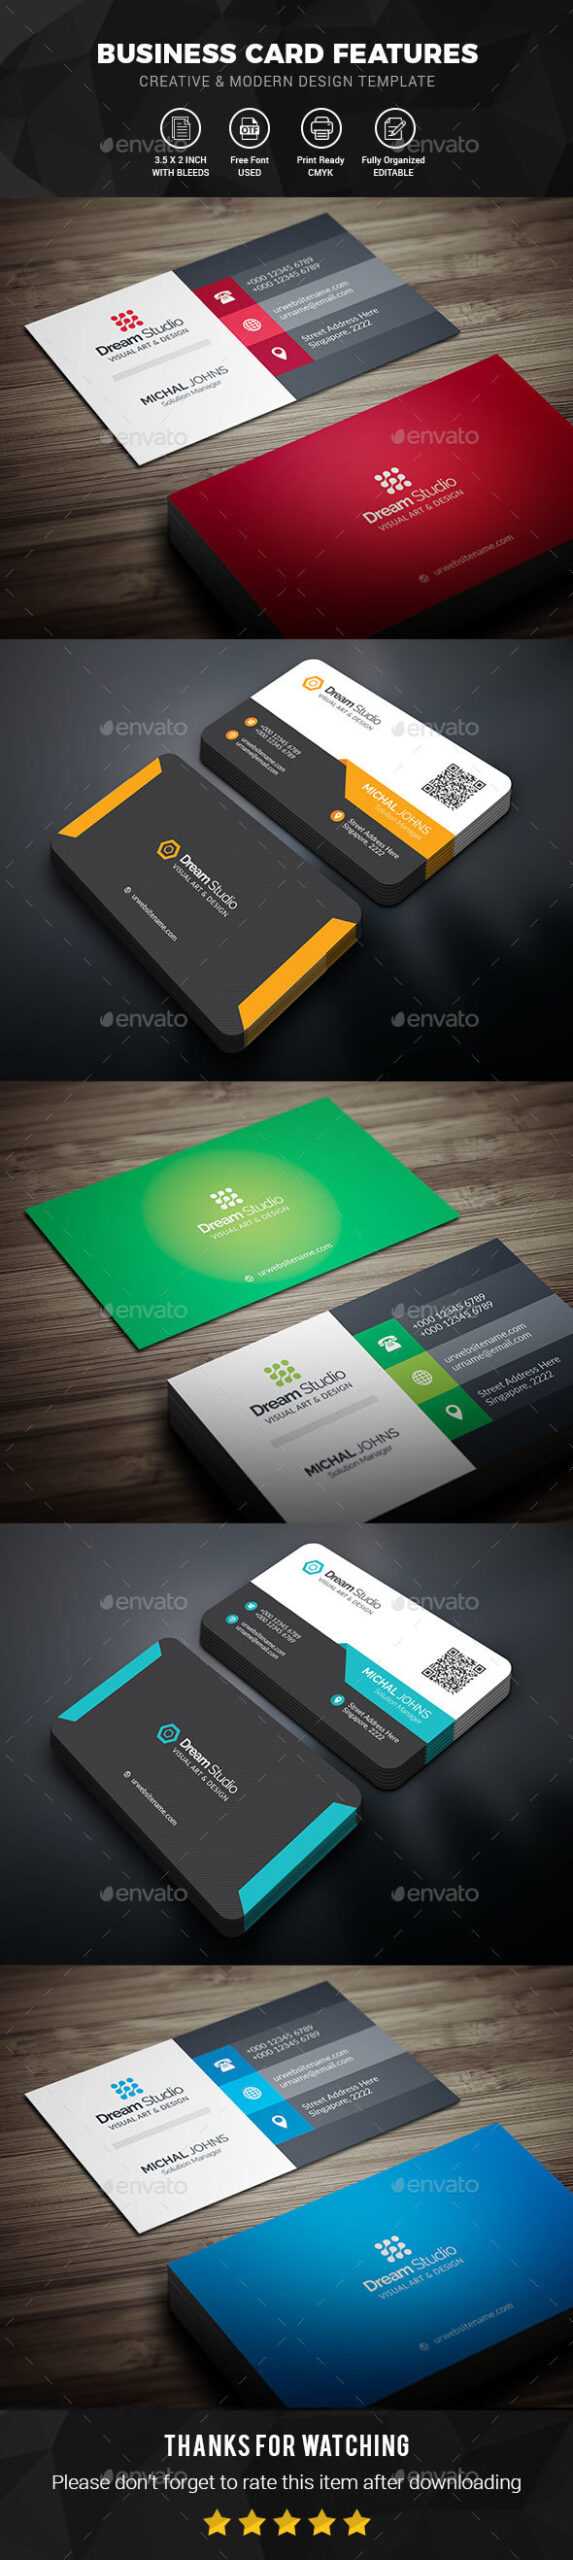 Business Card Templates & Designs From Graphicriver Throughout Business Card Maker Template